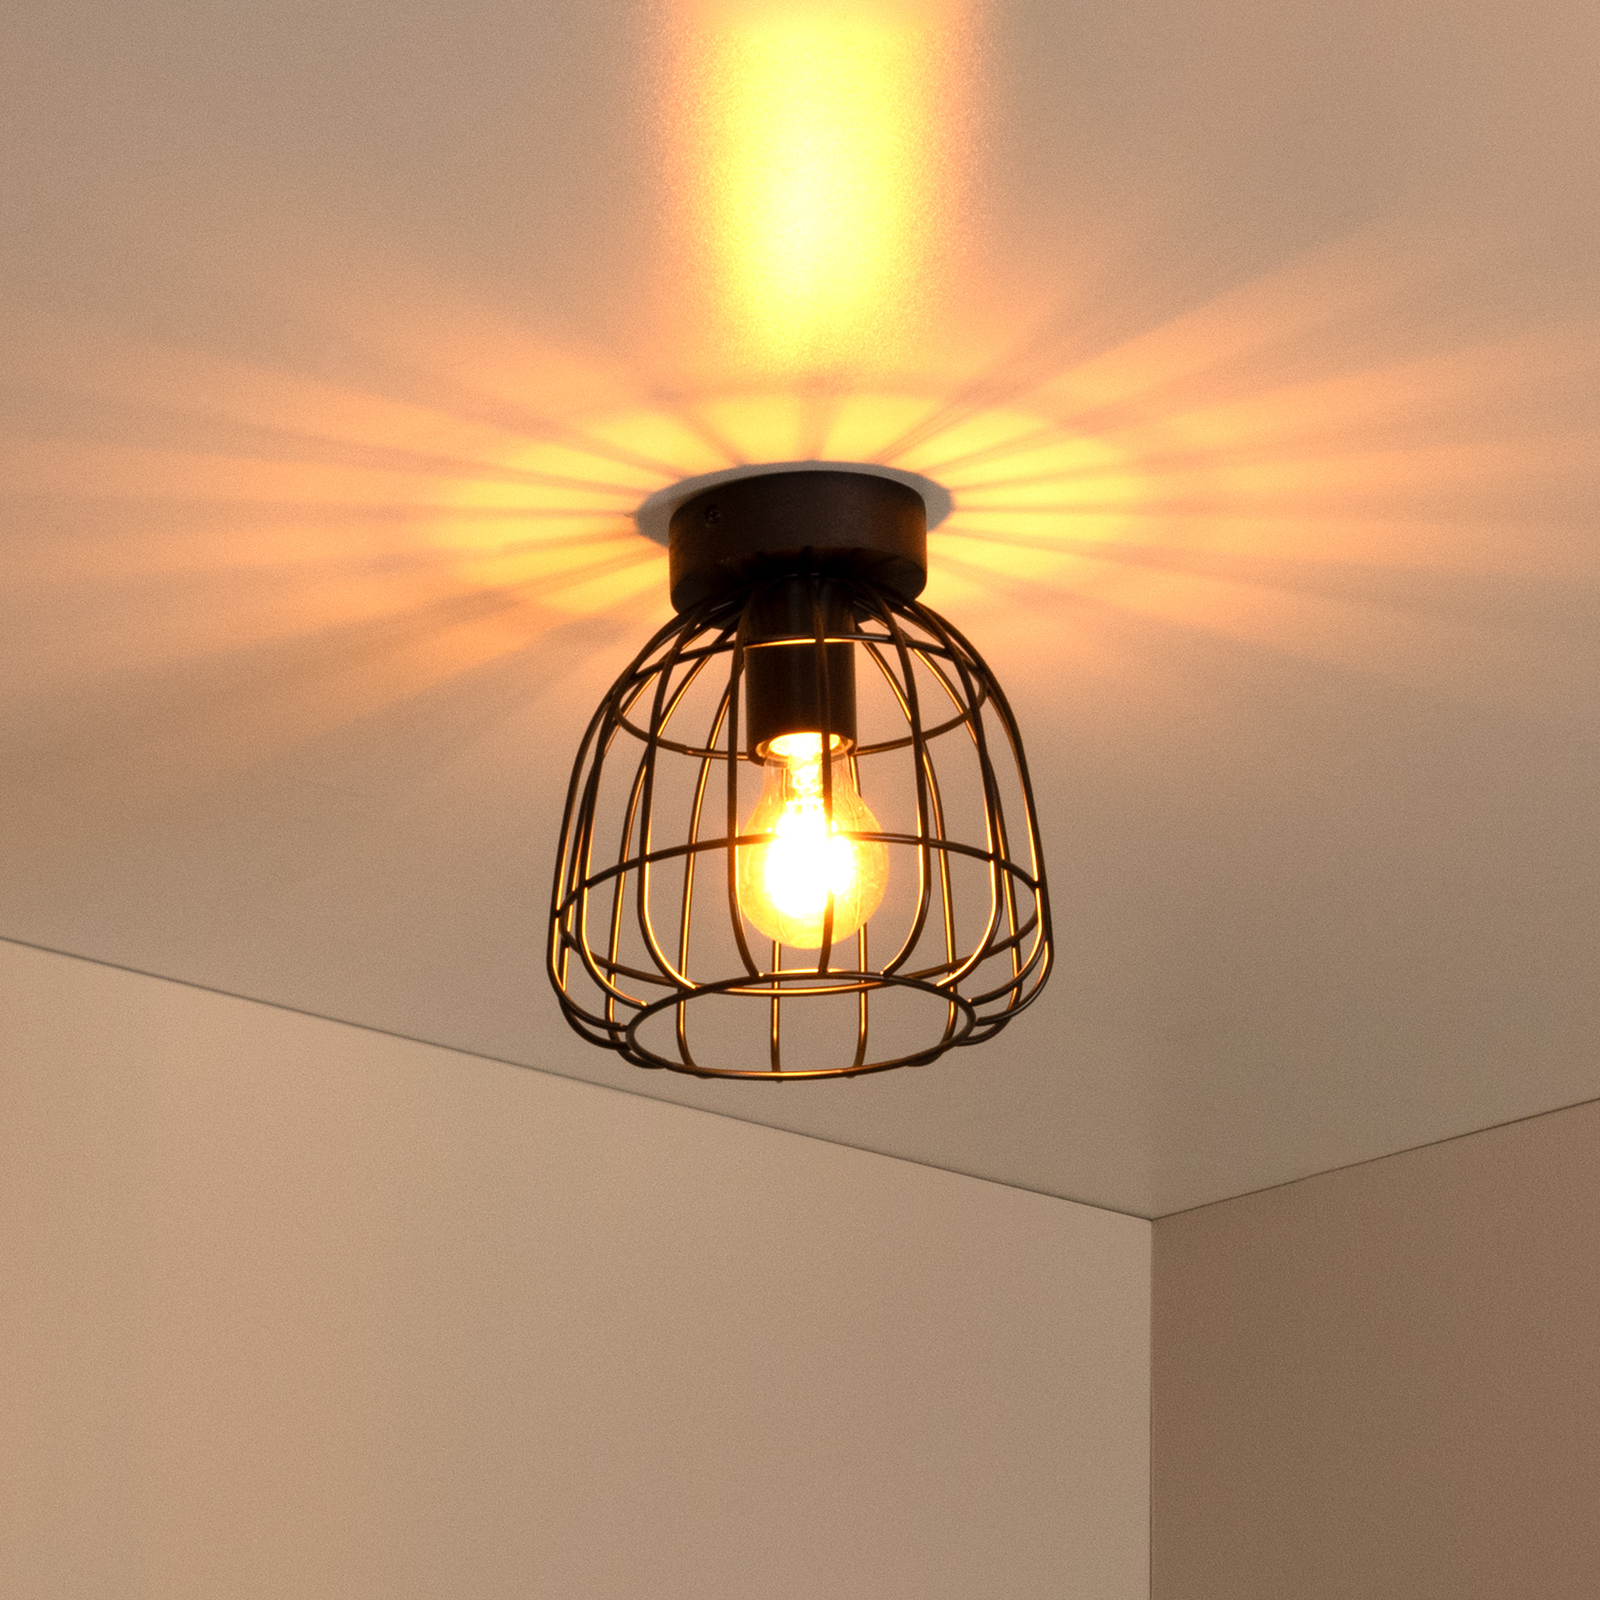 Filox ceiling light, cage lampshade, black